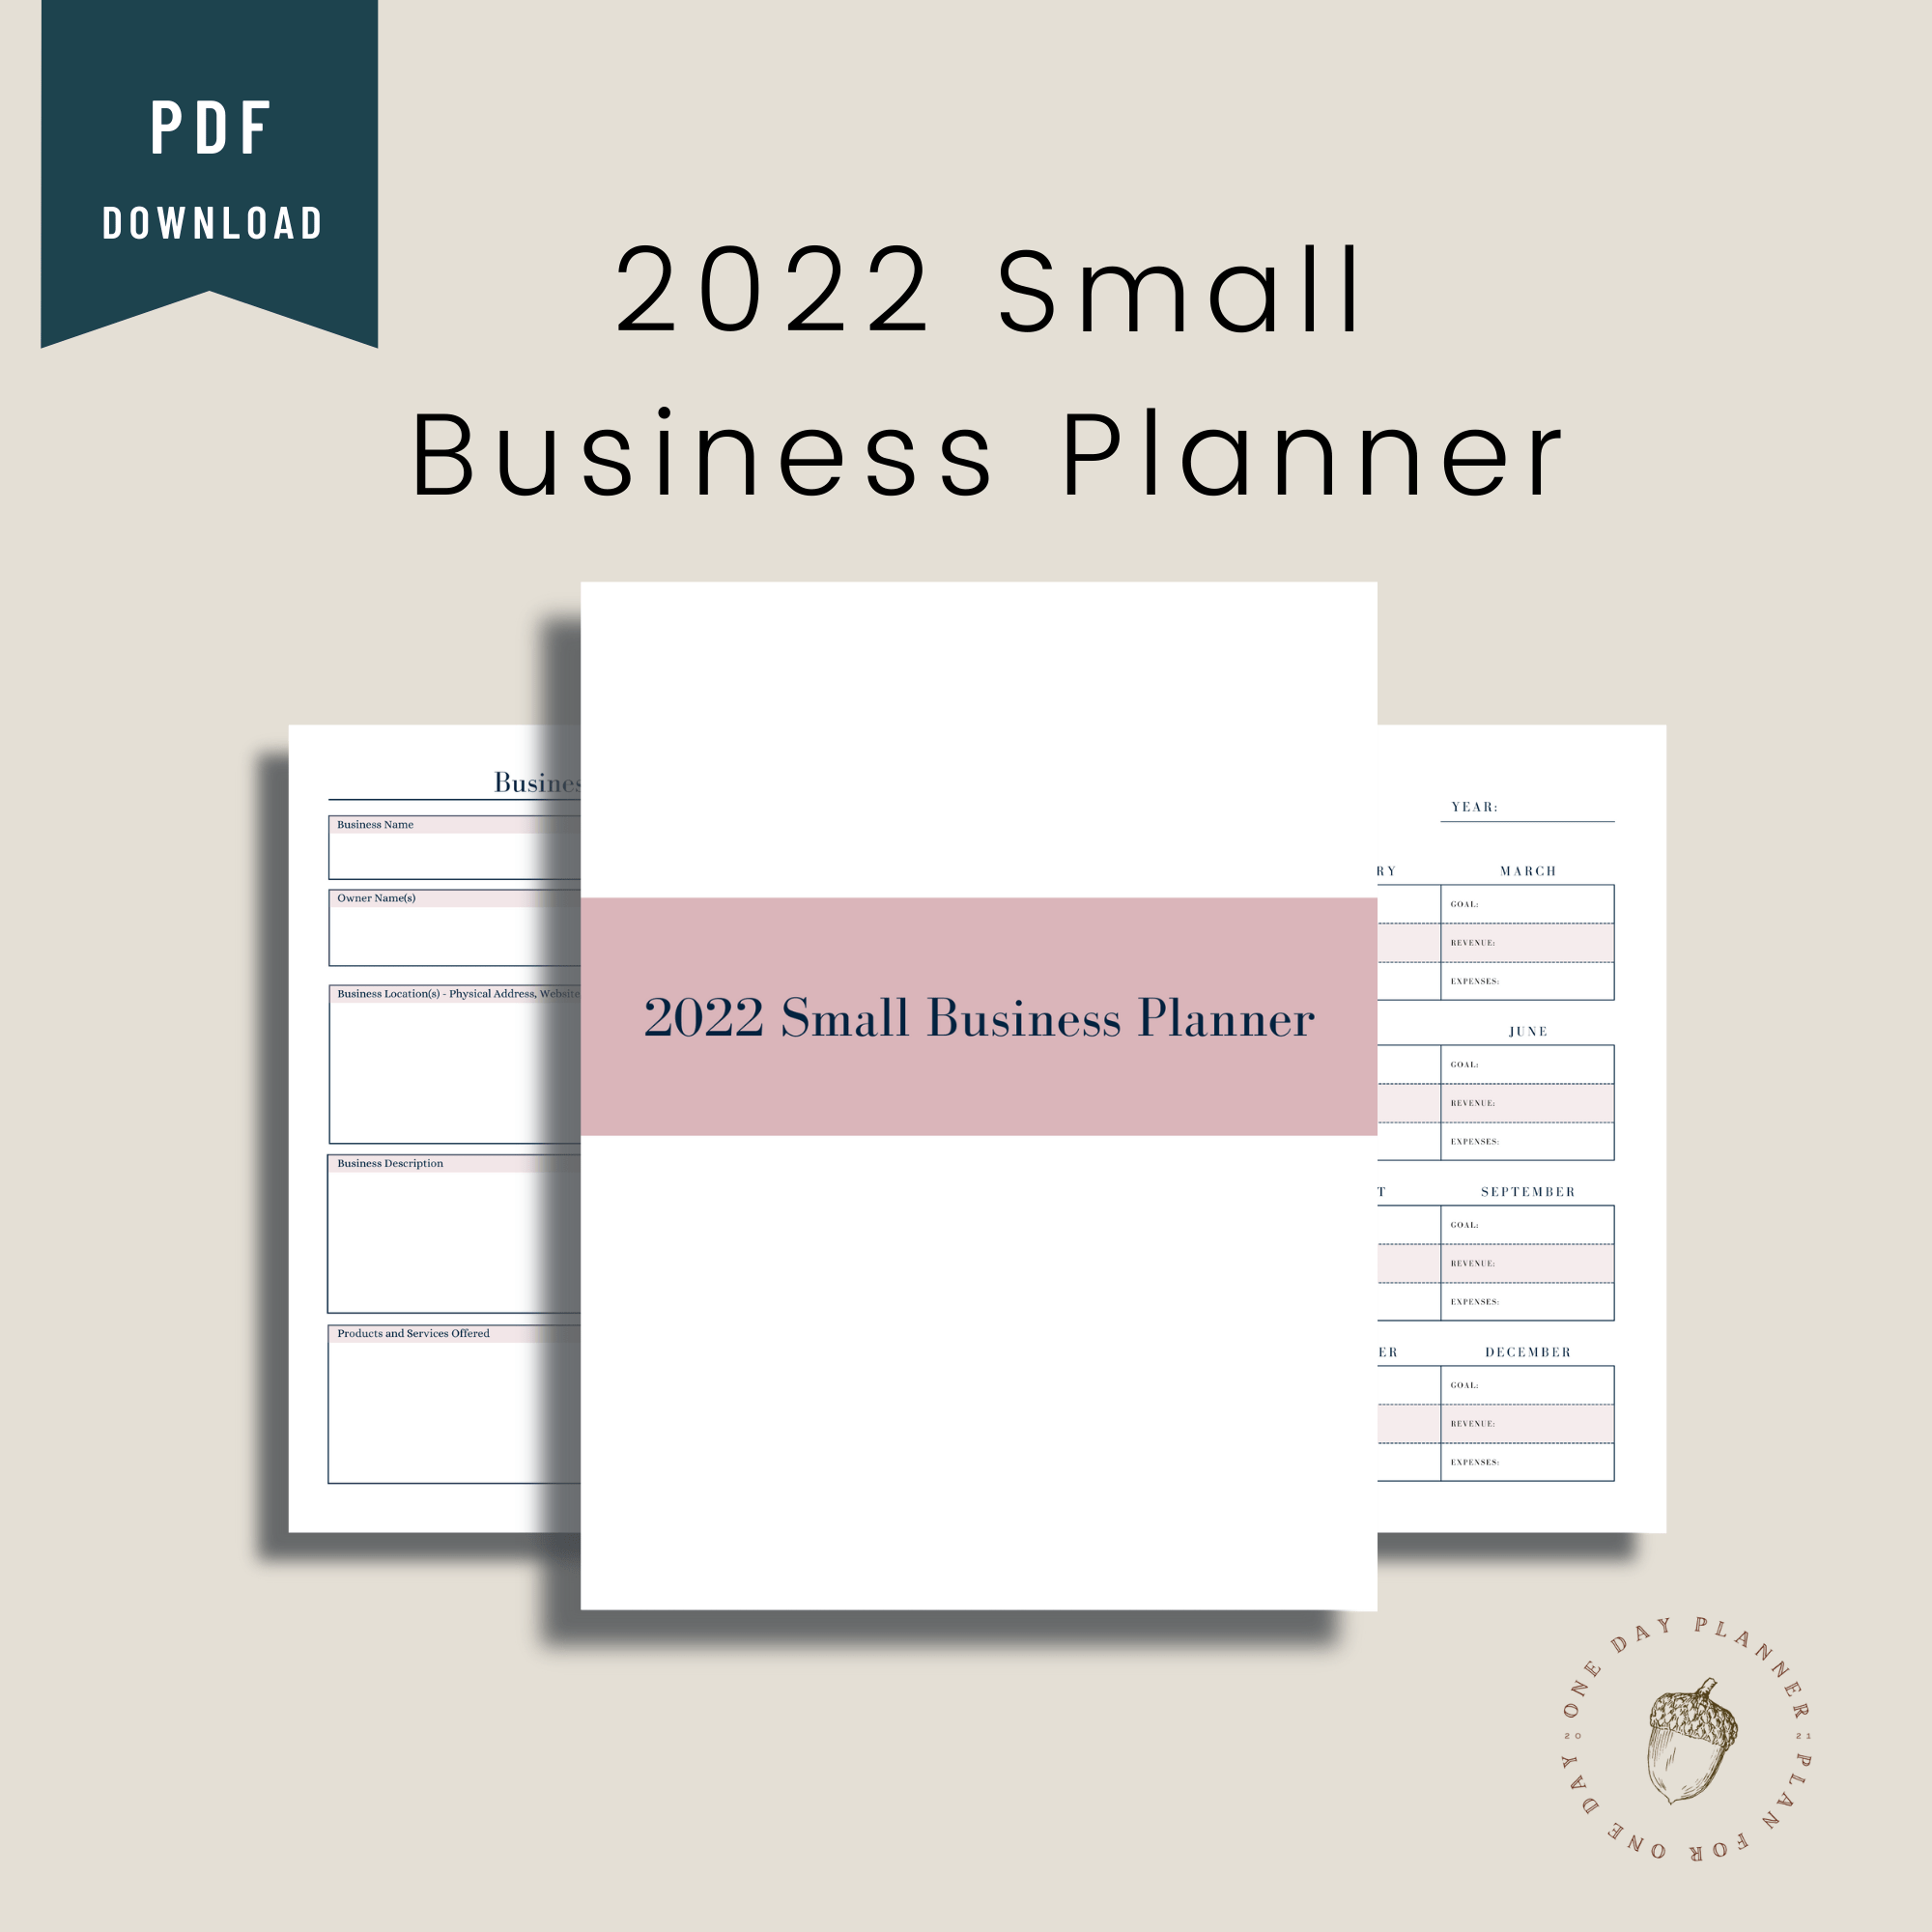 small business planner 2022 uk